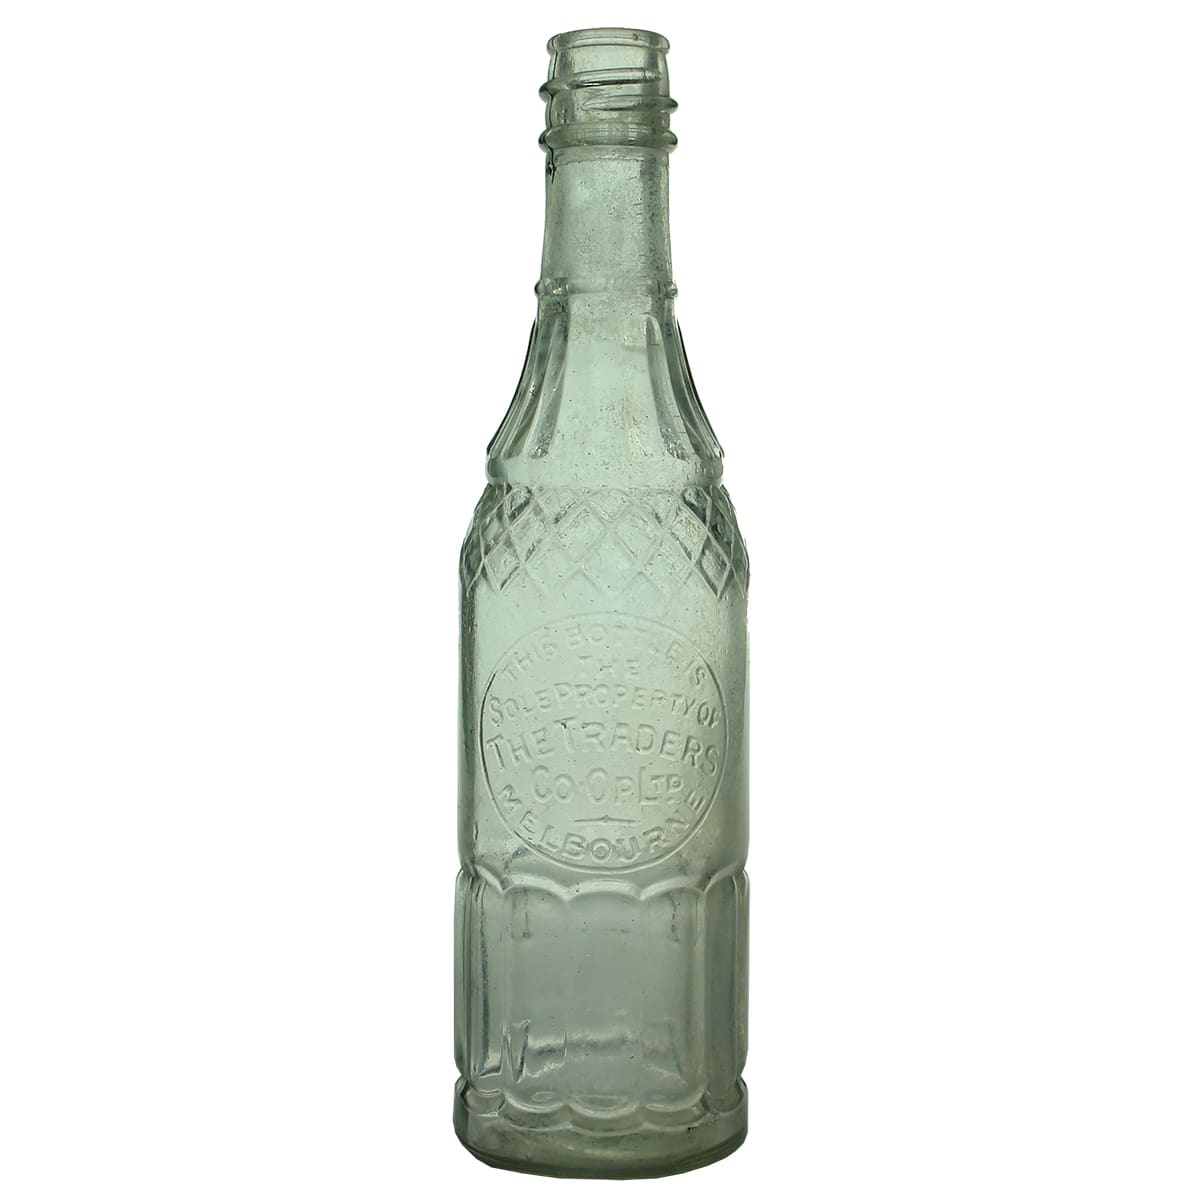 Cordial. Traders Bottle Co., Melbourne. Clear. 10 oz.